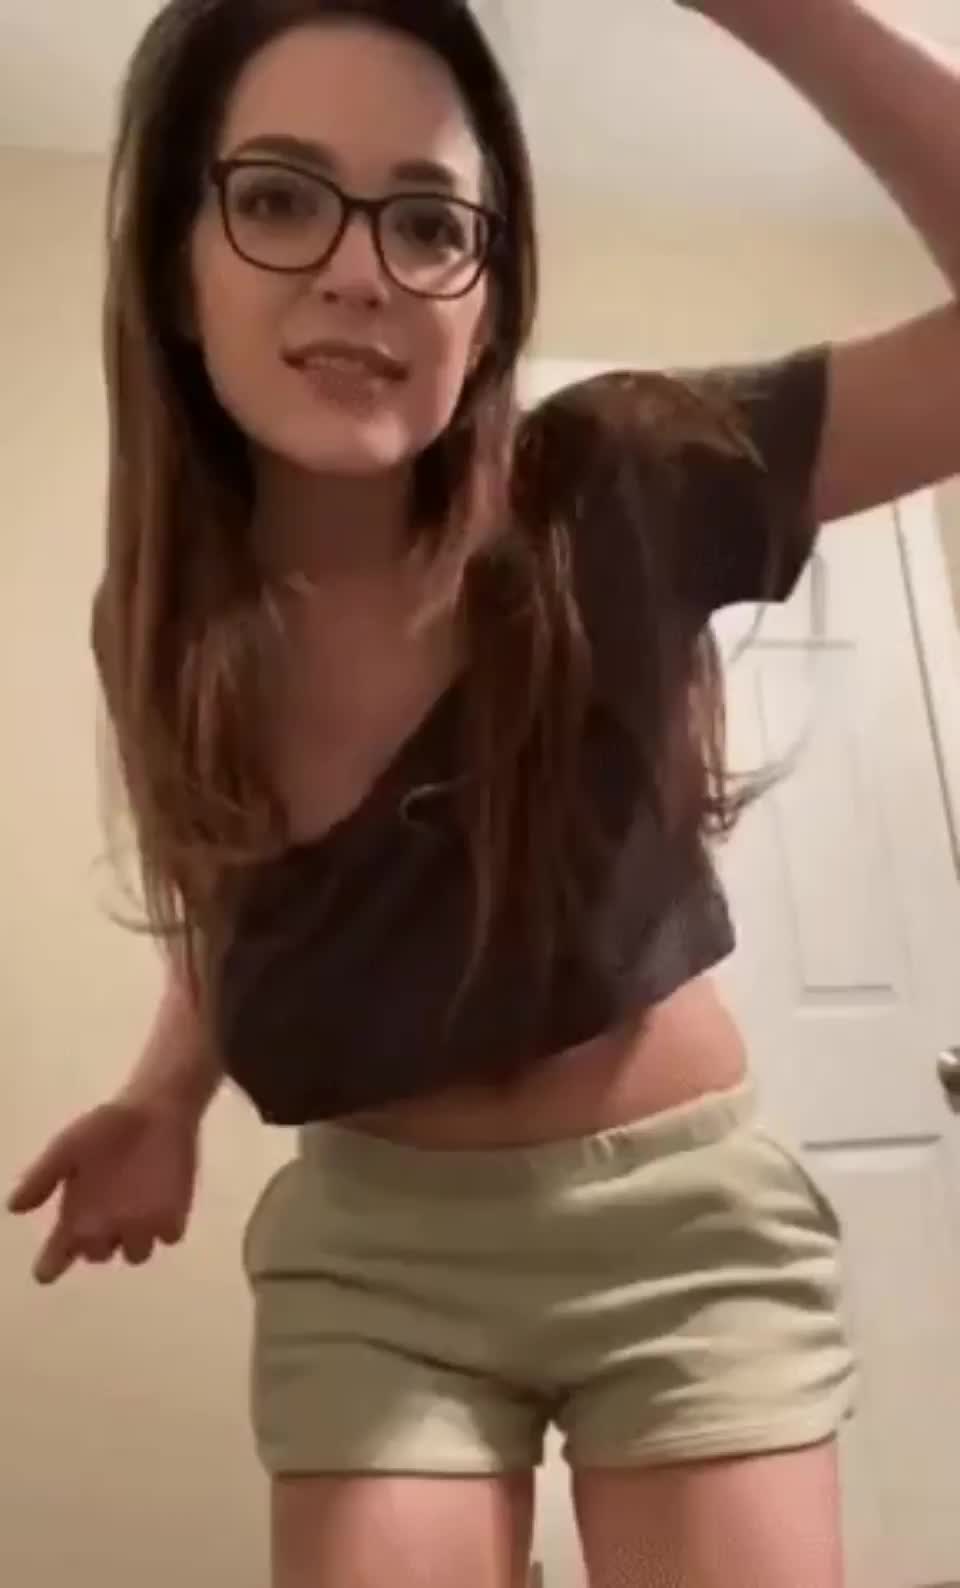 Removing her top : video clip